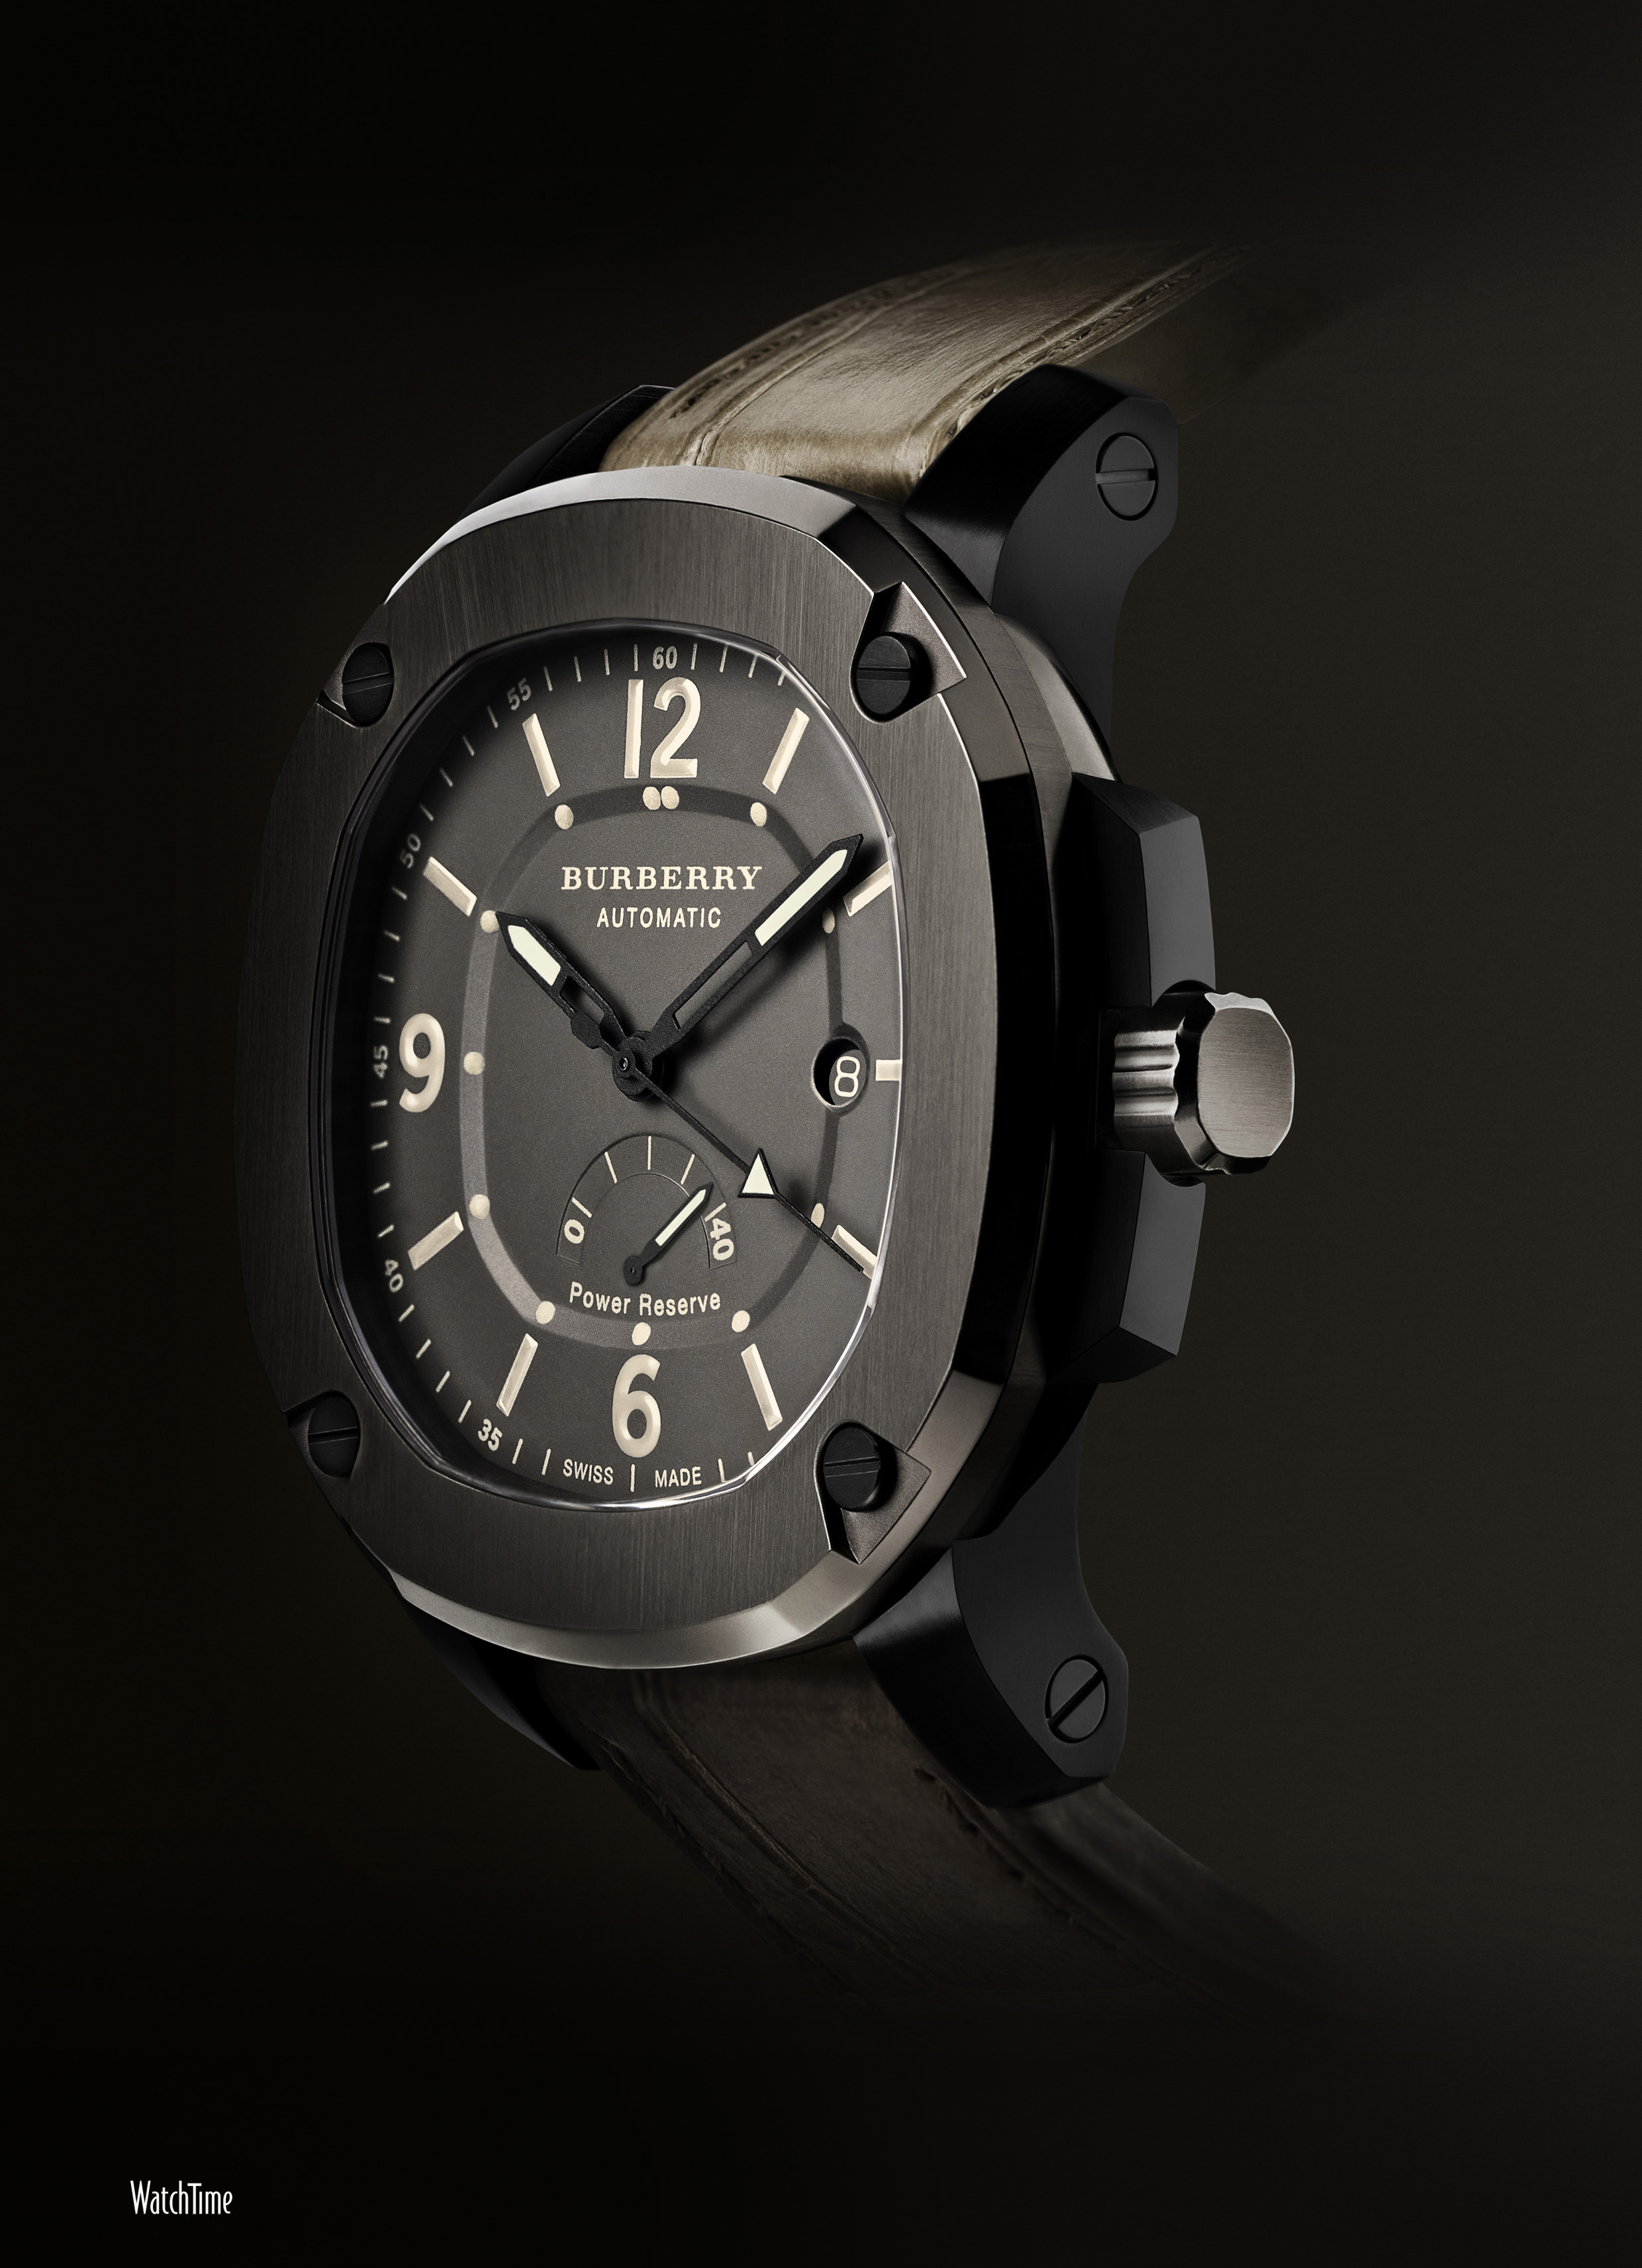 The Britains are Coming: New Watch Collection | WatchTime No.1 Watch Magazine